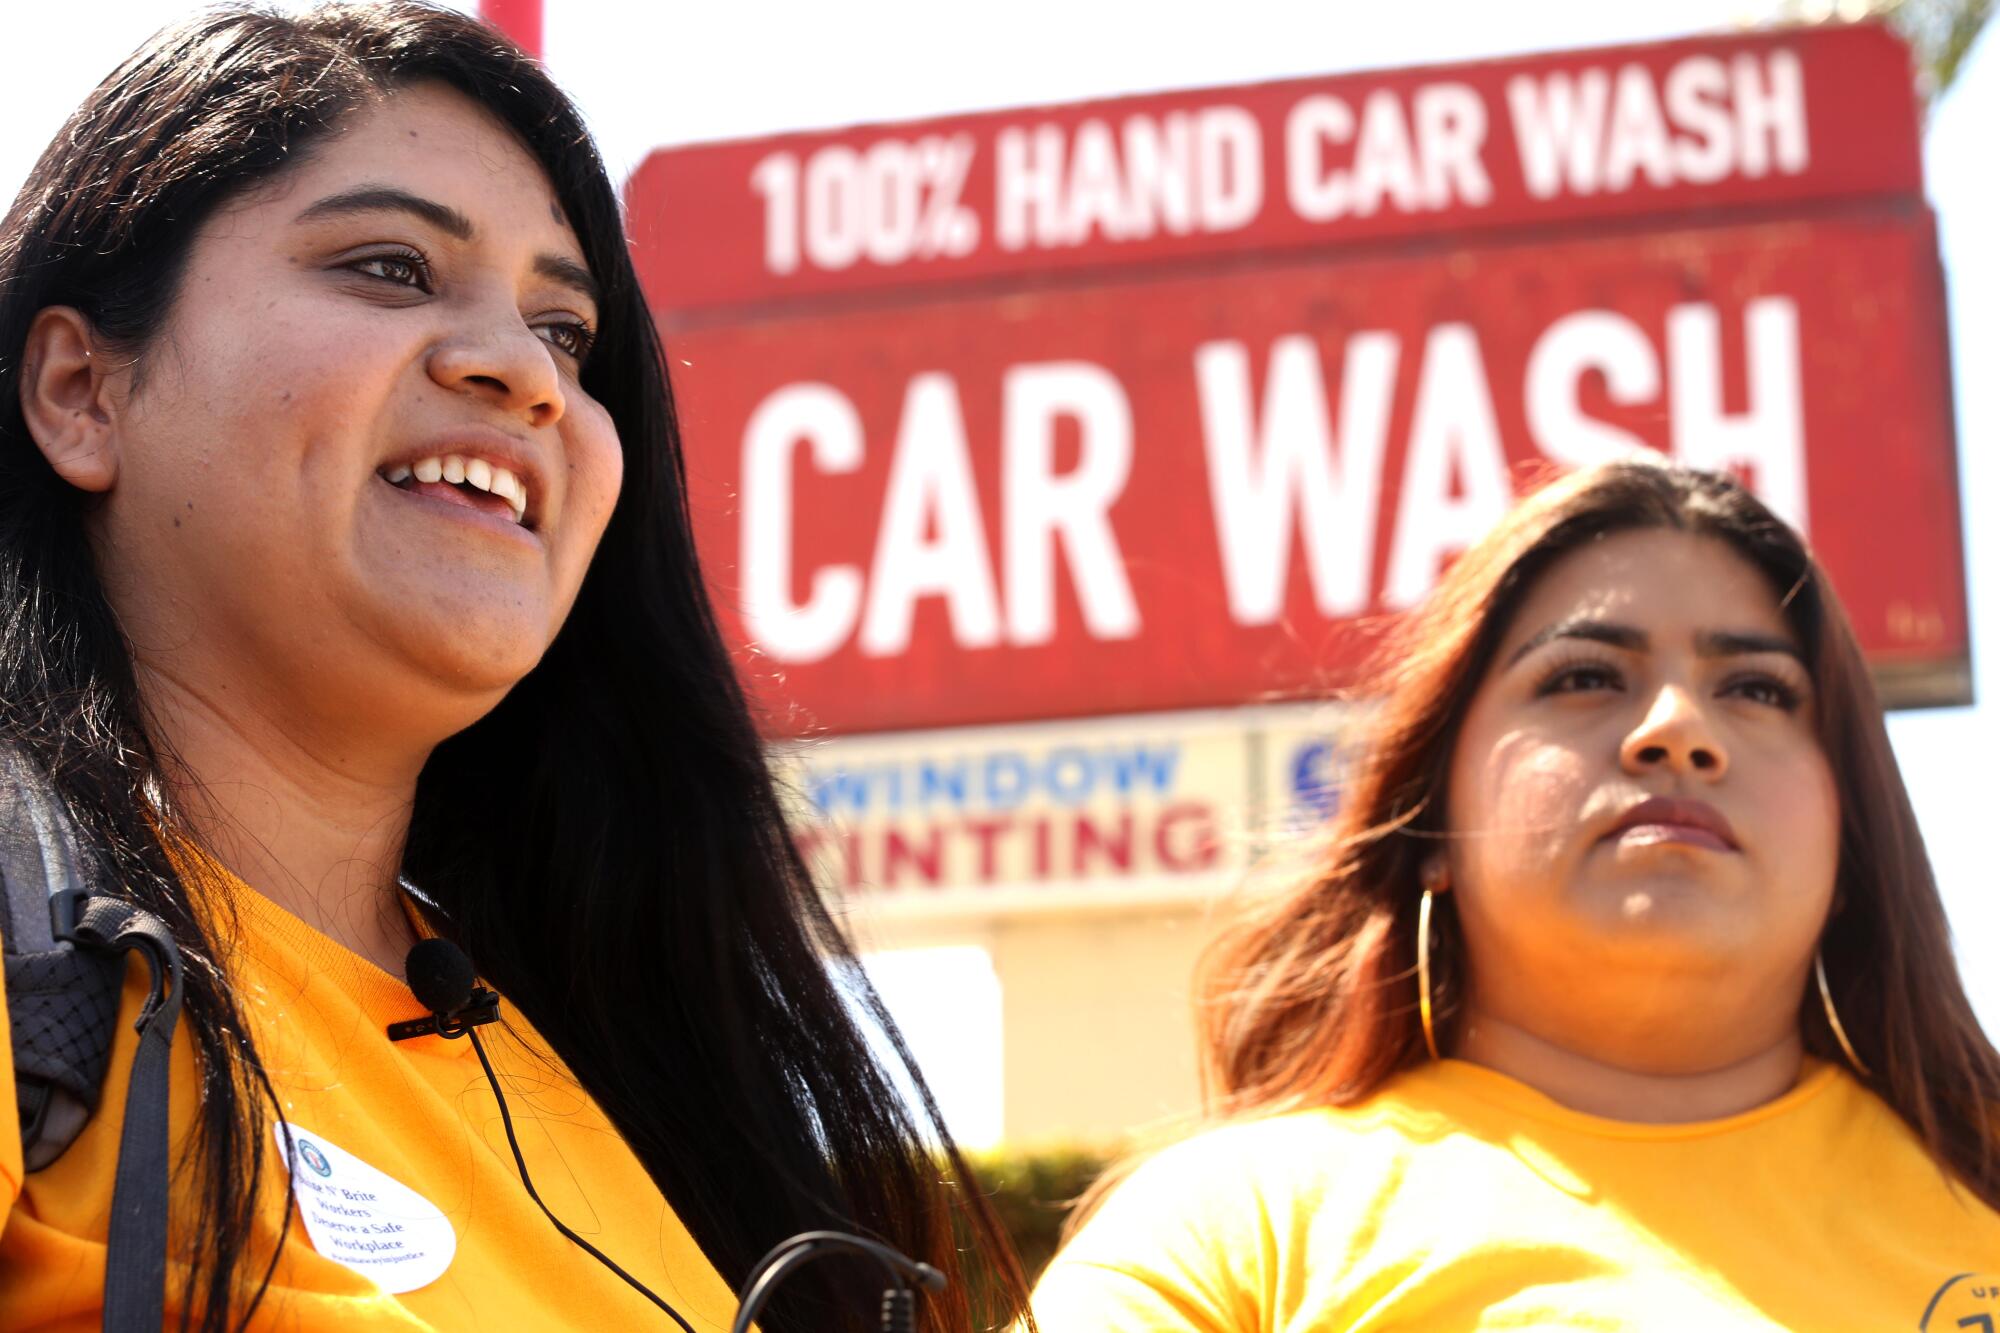 Two female UCLA students stand outside with a carwash sign in the background.